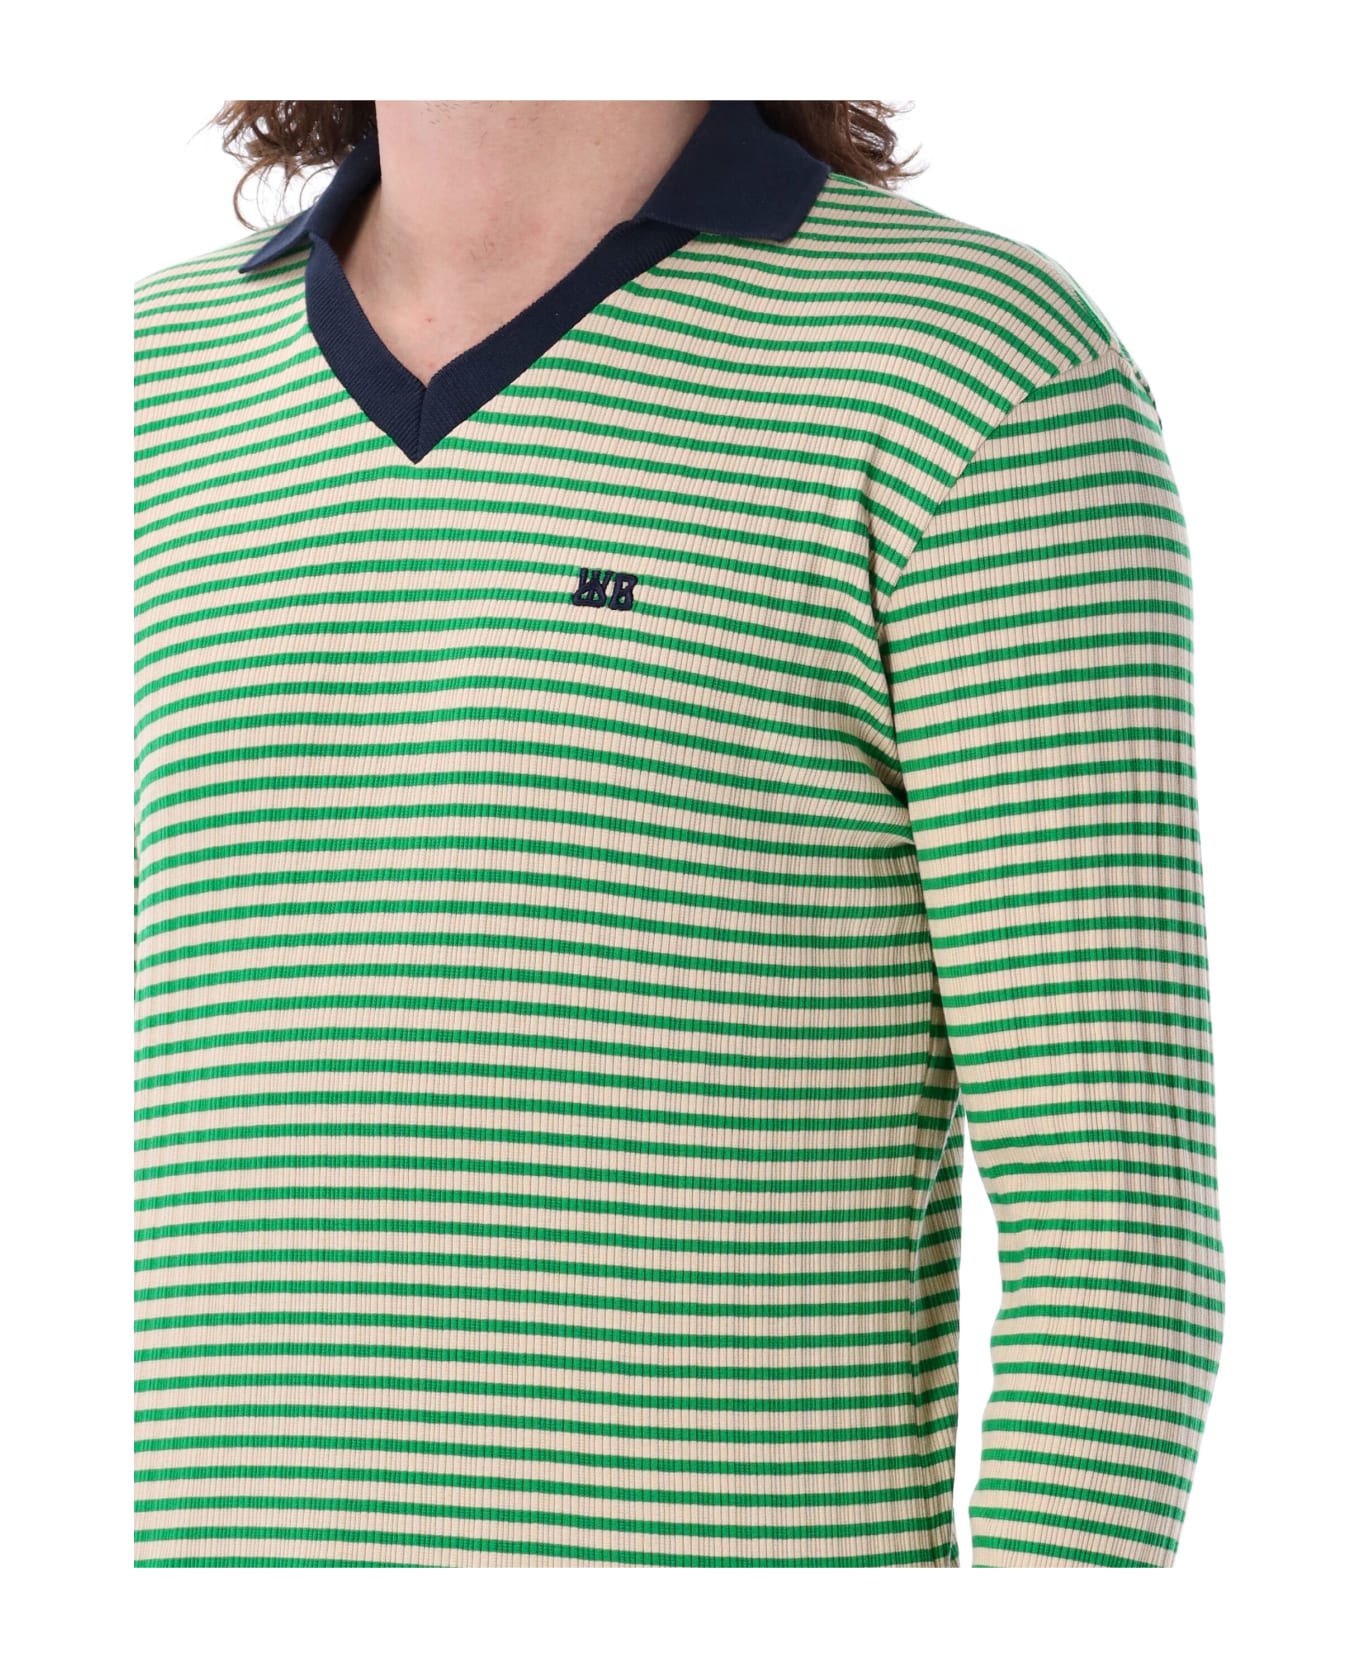 Wales Bonner Sonic Polo - IVORY/GREEN シャツ